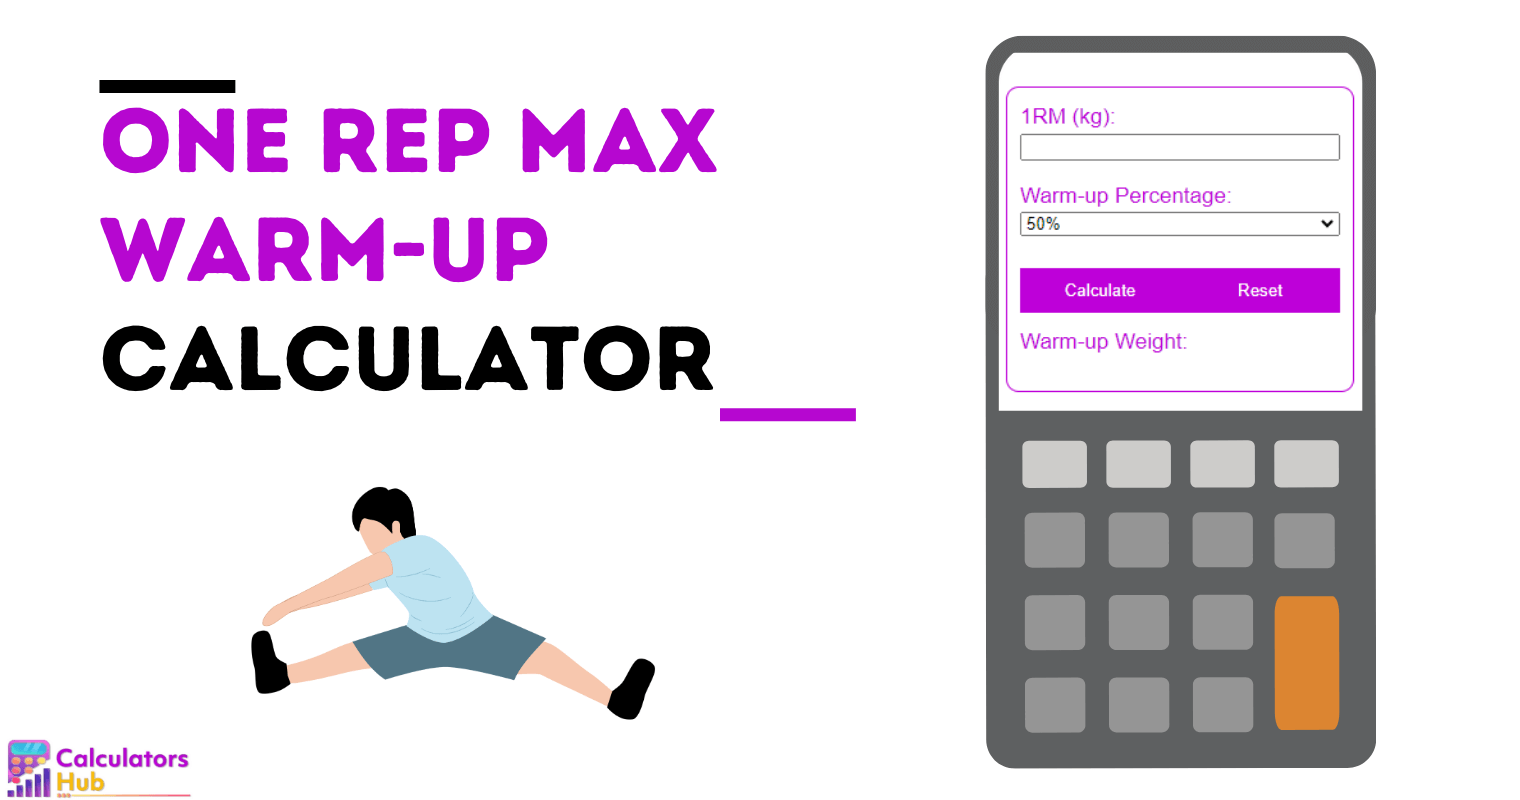 One Rep Max Warm-Up Calculator